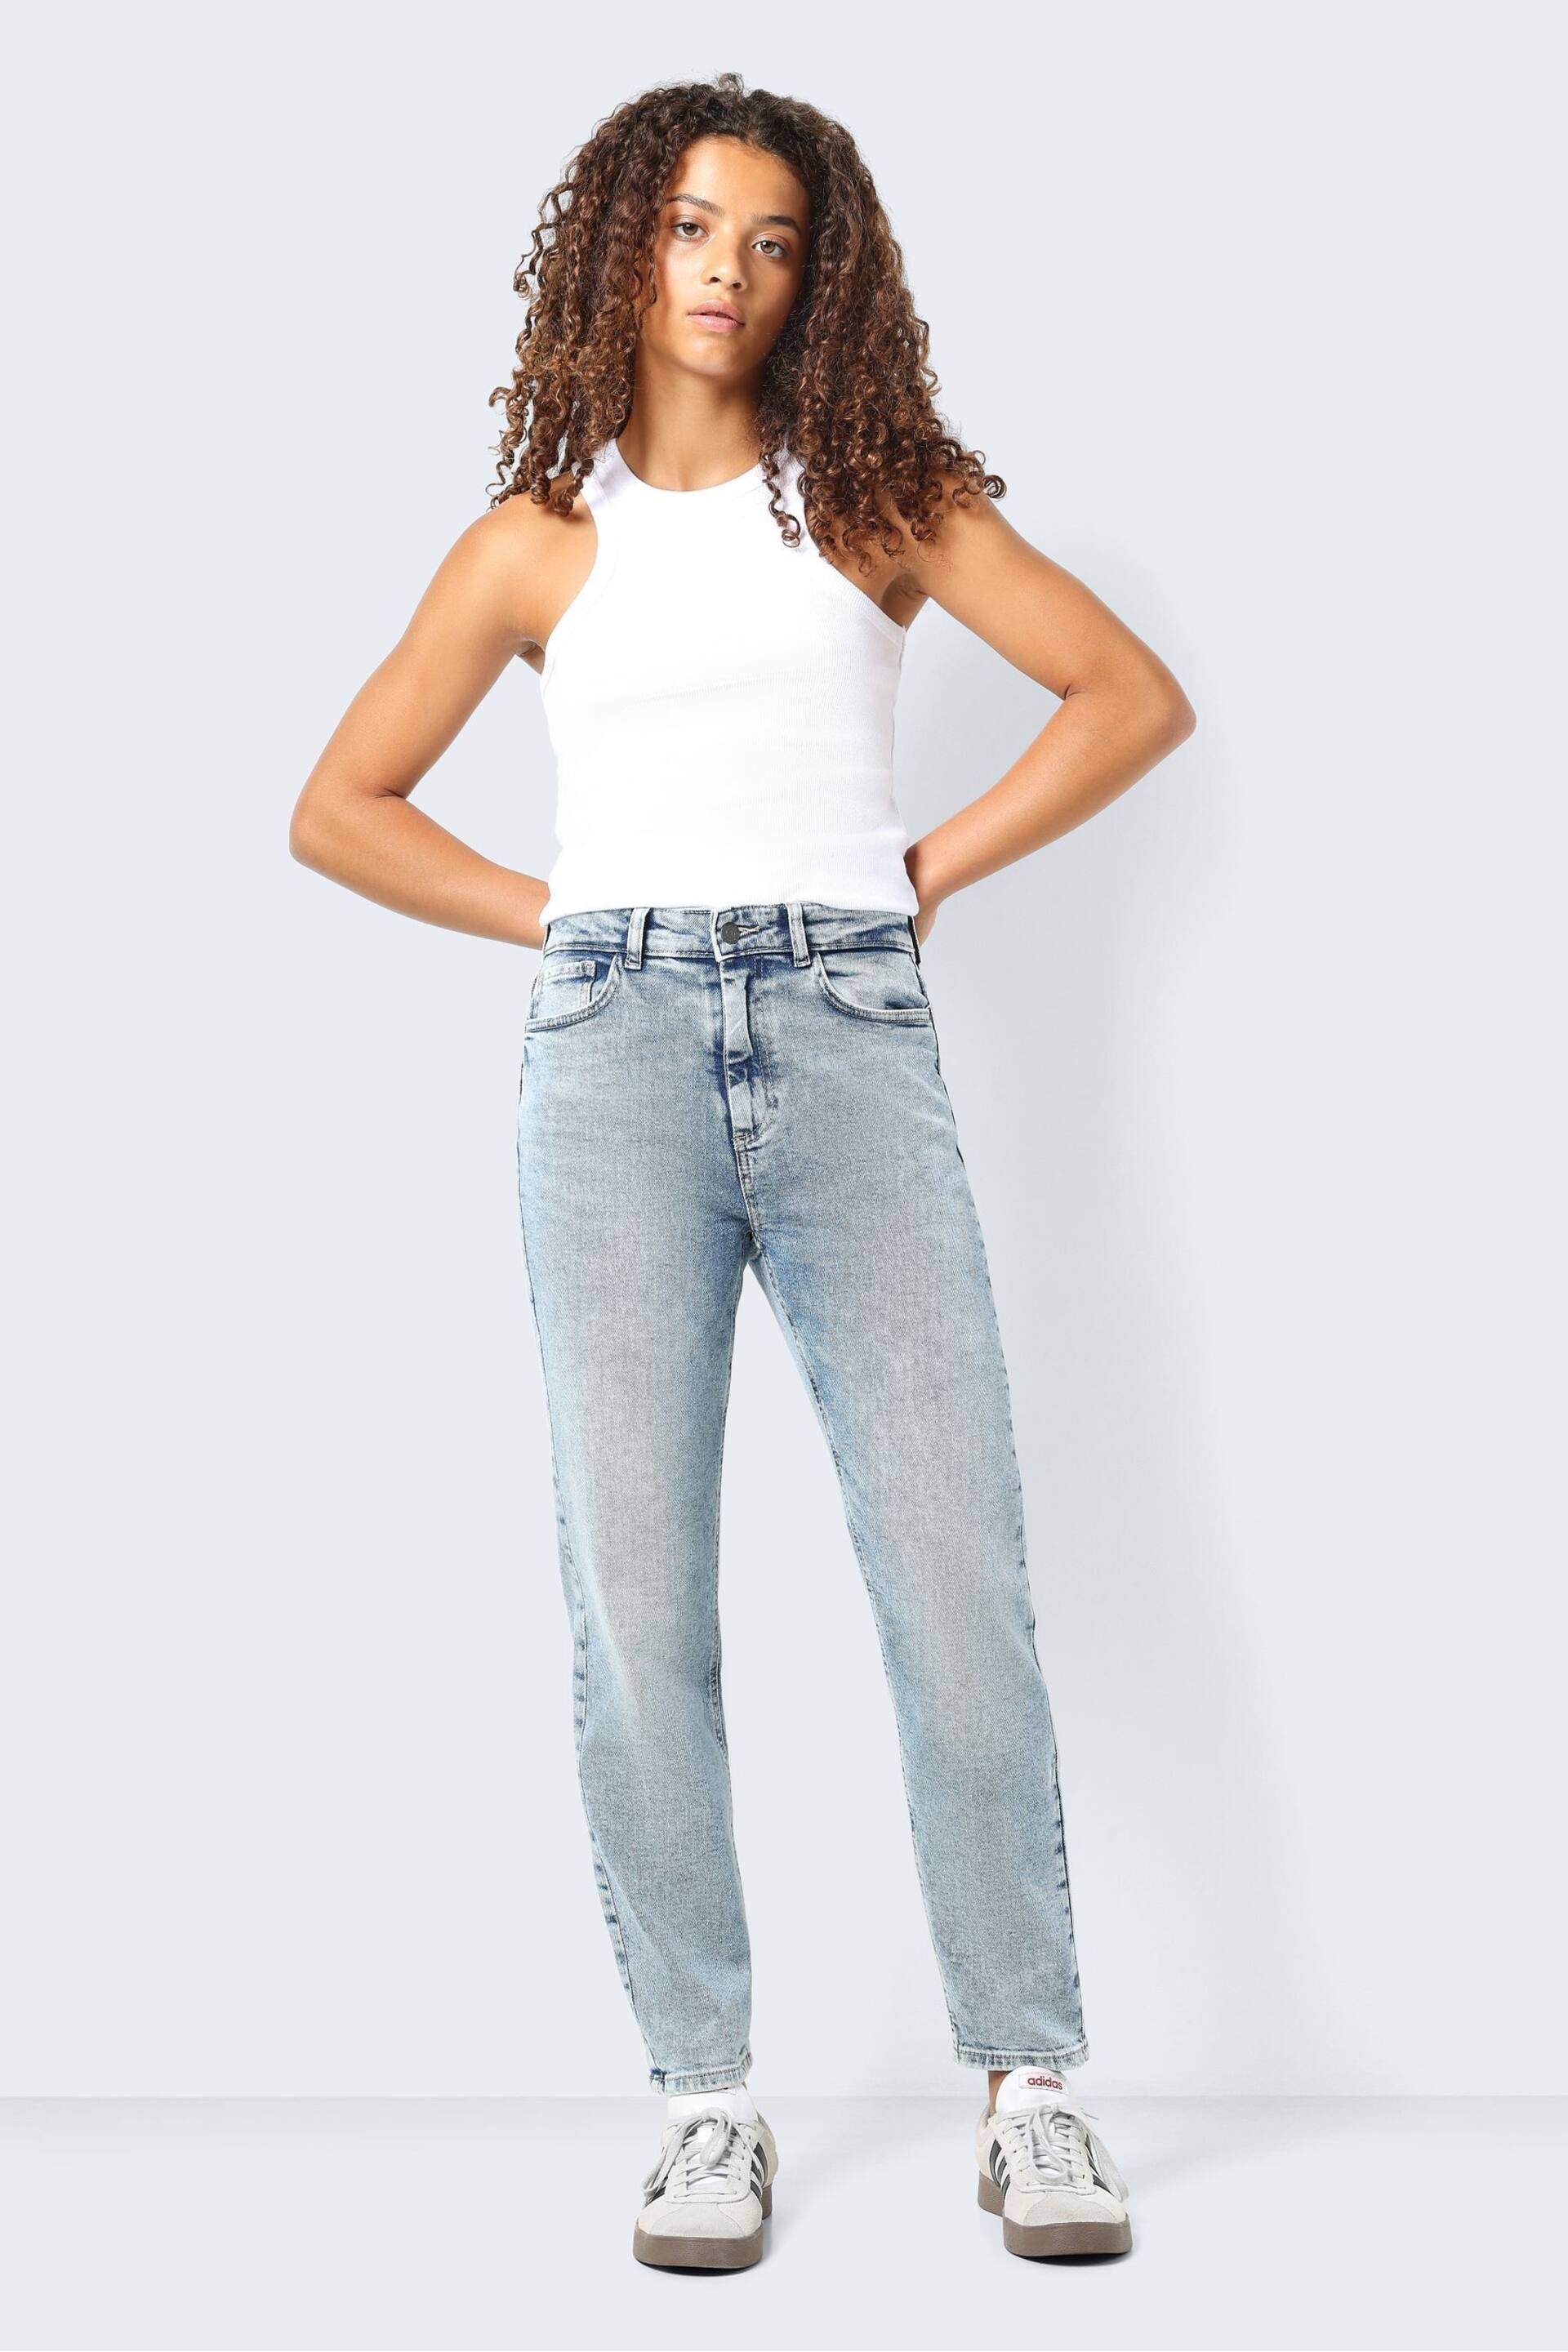 NOISY MAY Blue High Waisted Straight Leg Jeans - Image 3 of 7